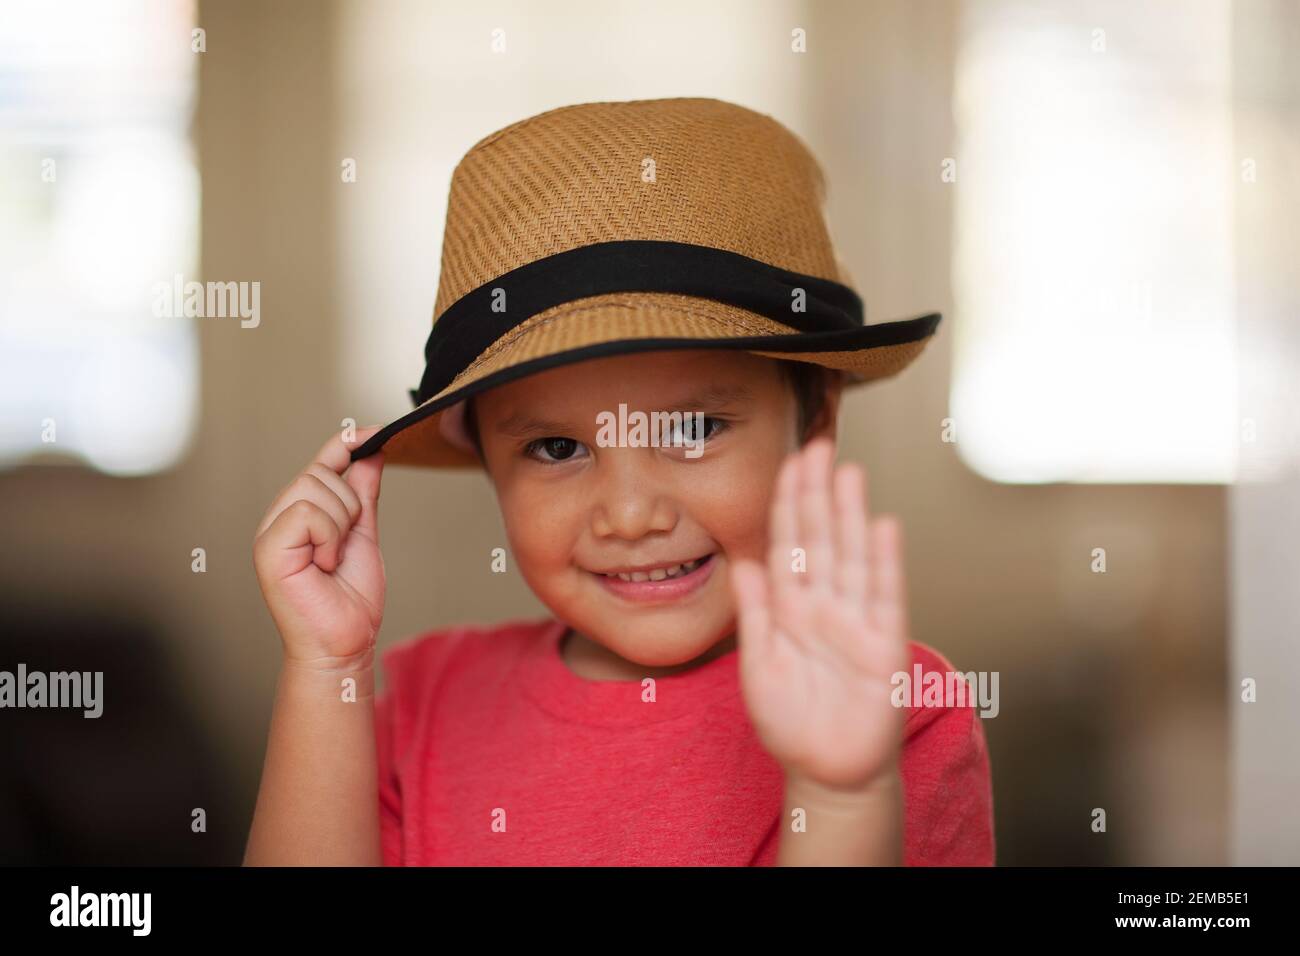 A cute little boy performing the hat tip with a smile on his face, to express gratitude or a conventional salutation. Stock Photo